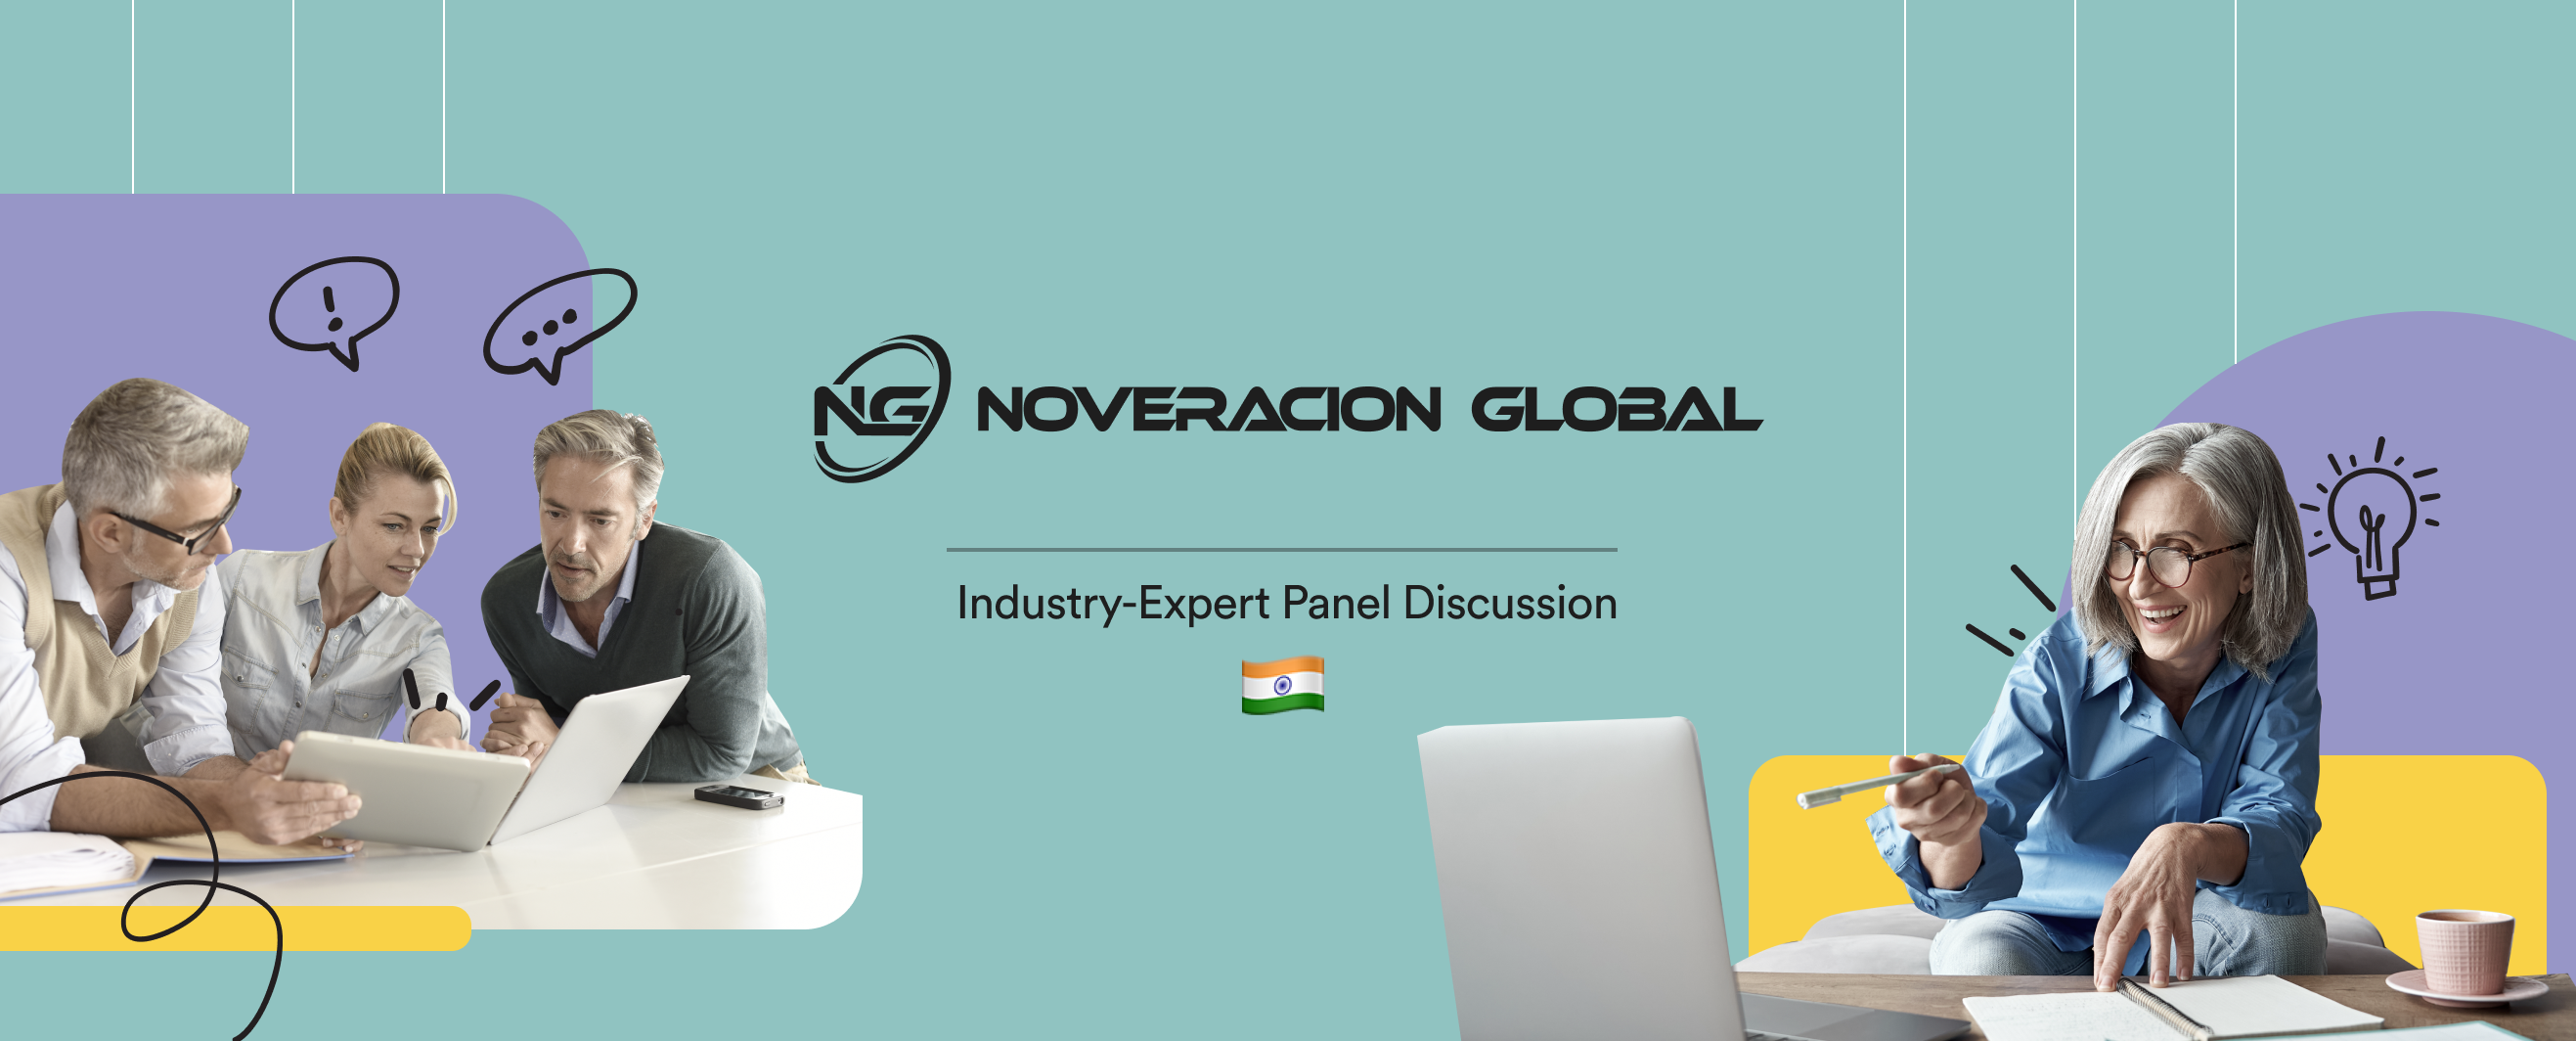 Powered by Airmeet, ‘Noveracion Global’ brought together C-level executives from 20+ countries